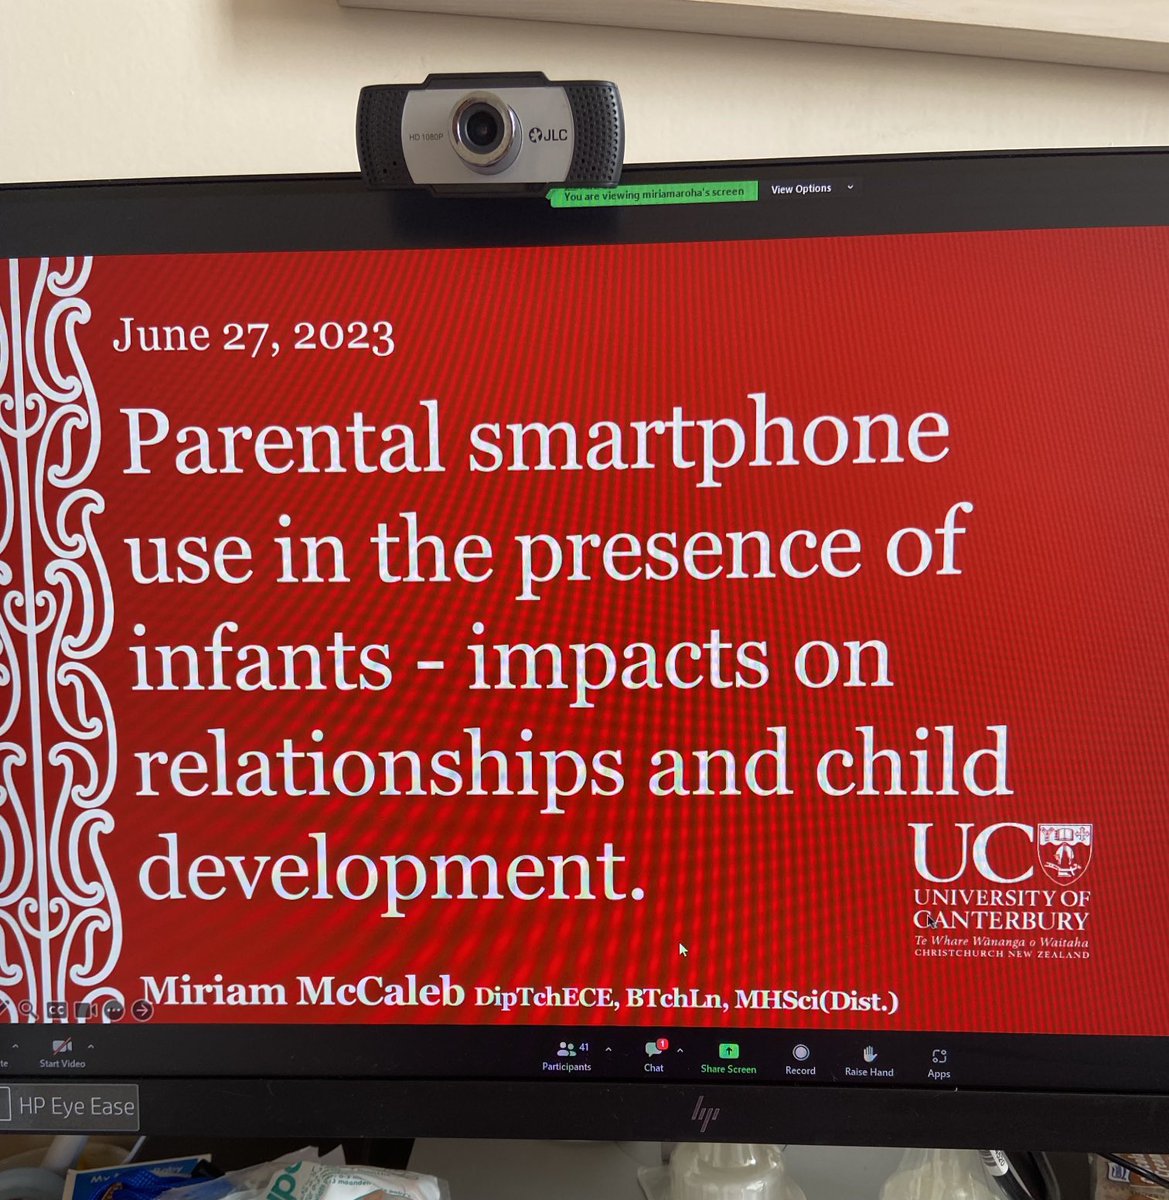 Really insightful fireside chat exploring the relationship between mothers and babies in the context of smartphone use-babies as young as 4mths demonstrate more avoidant behaviour in the context of such smartphone use 
#IMH #PIMH #parenting #technoference #attachment #matrescence